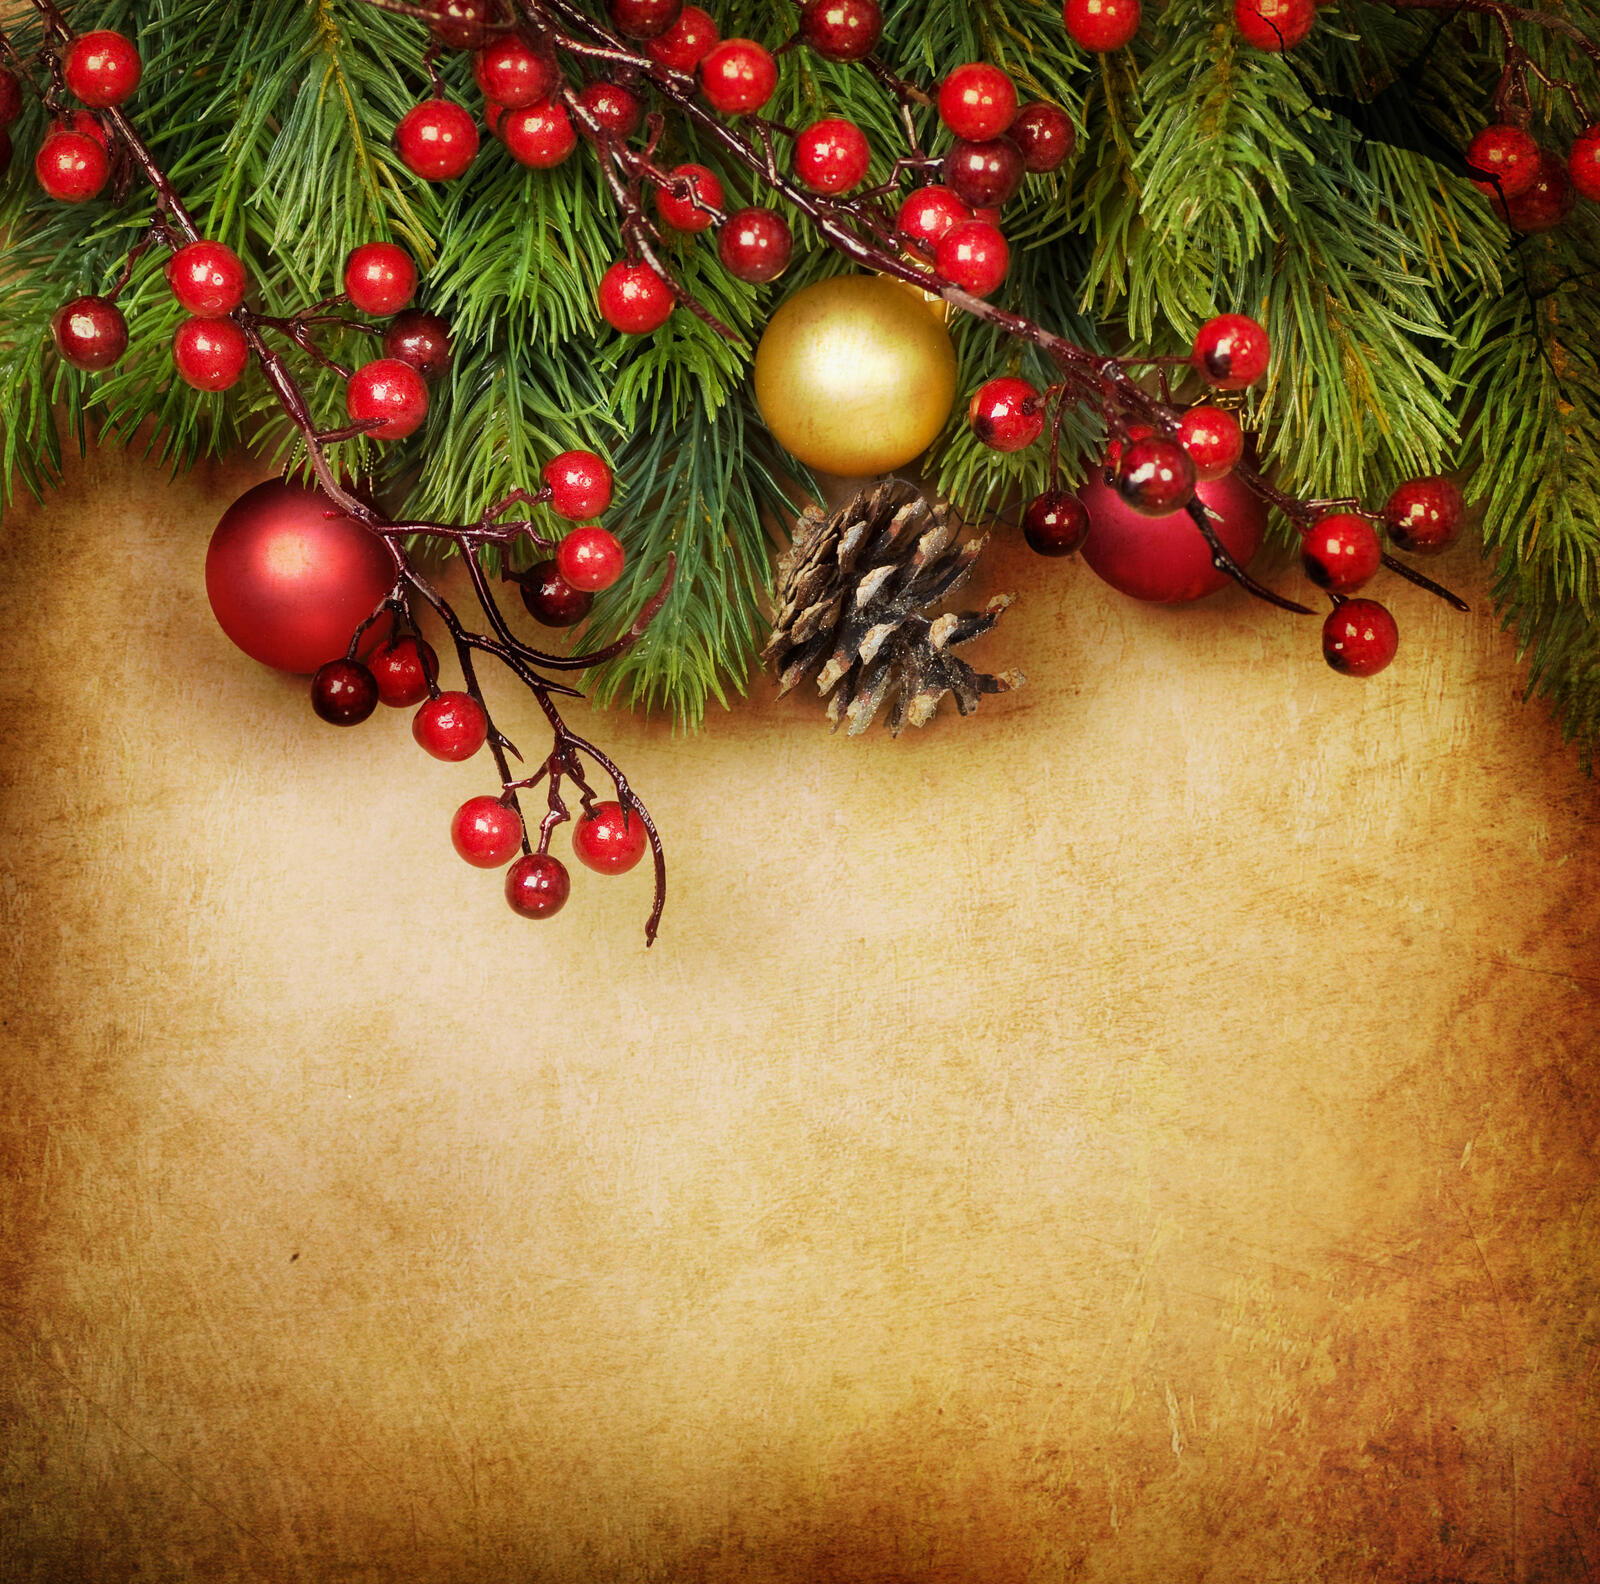 Wallpapers Christmas decorations New Year s style background on the desktop